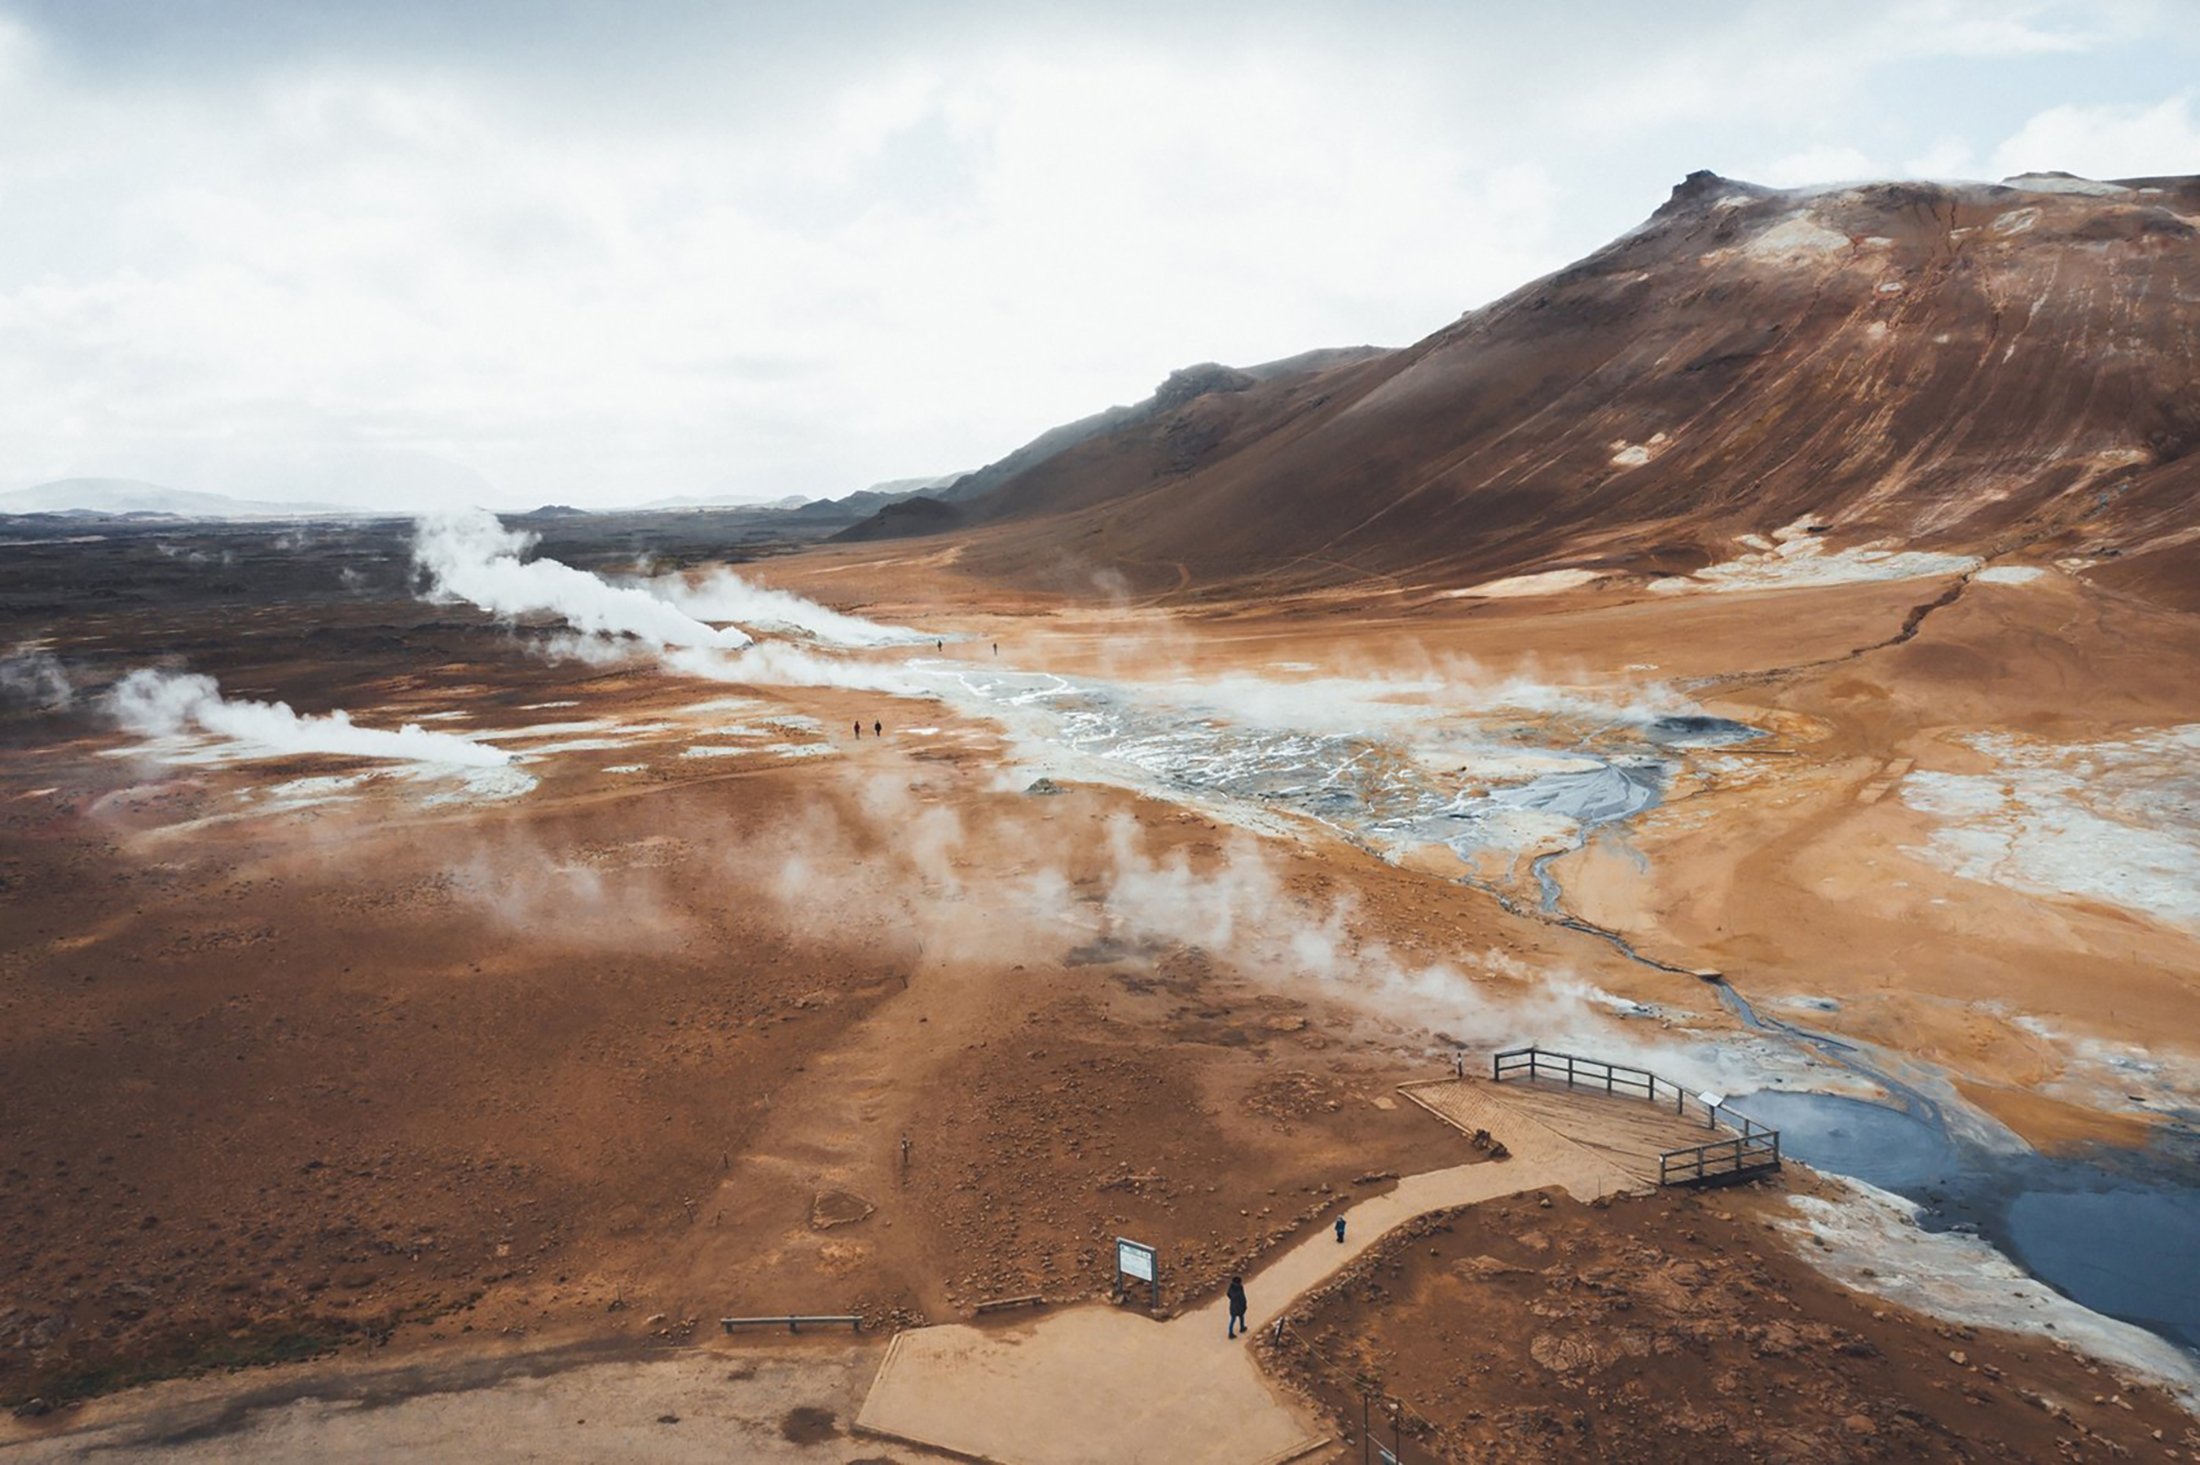 The barren lunar landscape Hverir, where bubbles and steam rise up from countless grey mud holes. (Visit North Iceland via dpa)